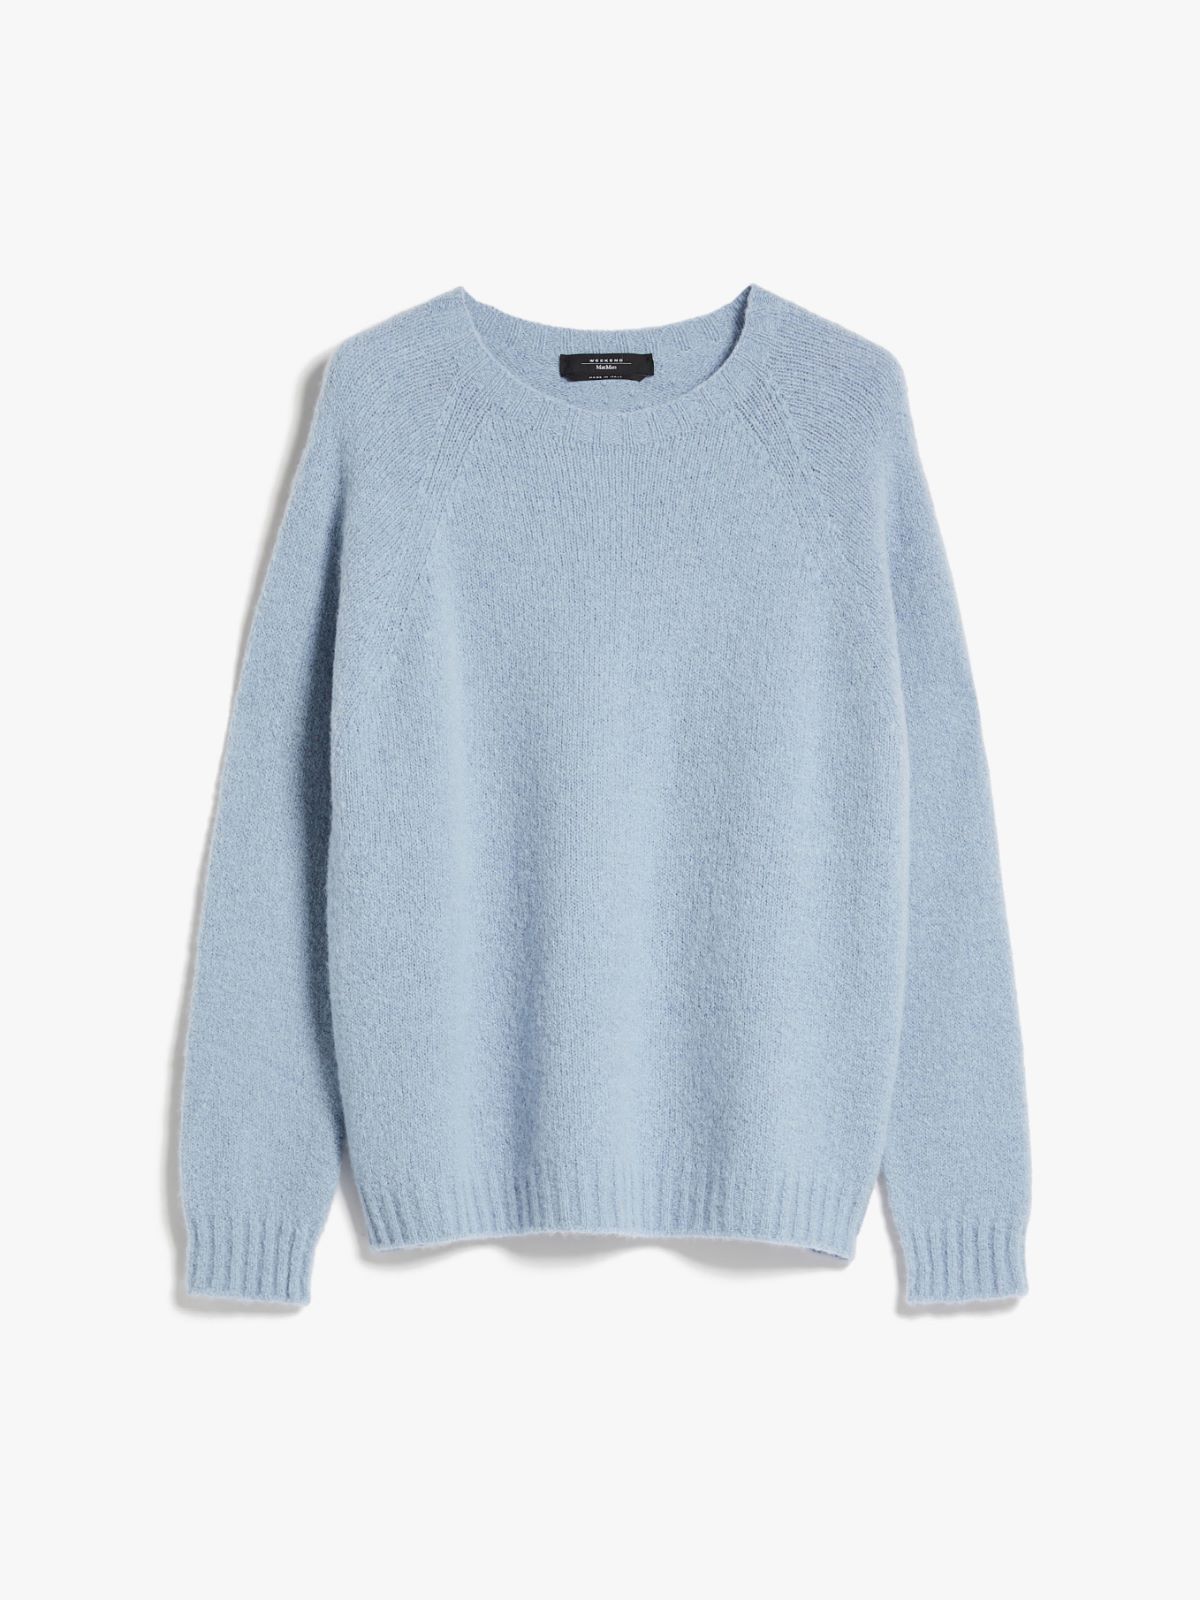 Soft knit top in alpaca and cotton - LIGHT BLUE - Weekend Max Mara - 6